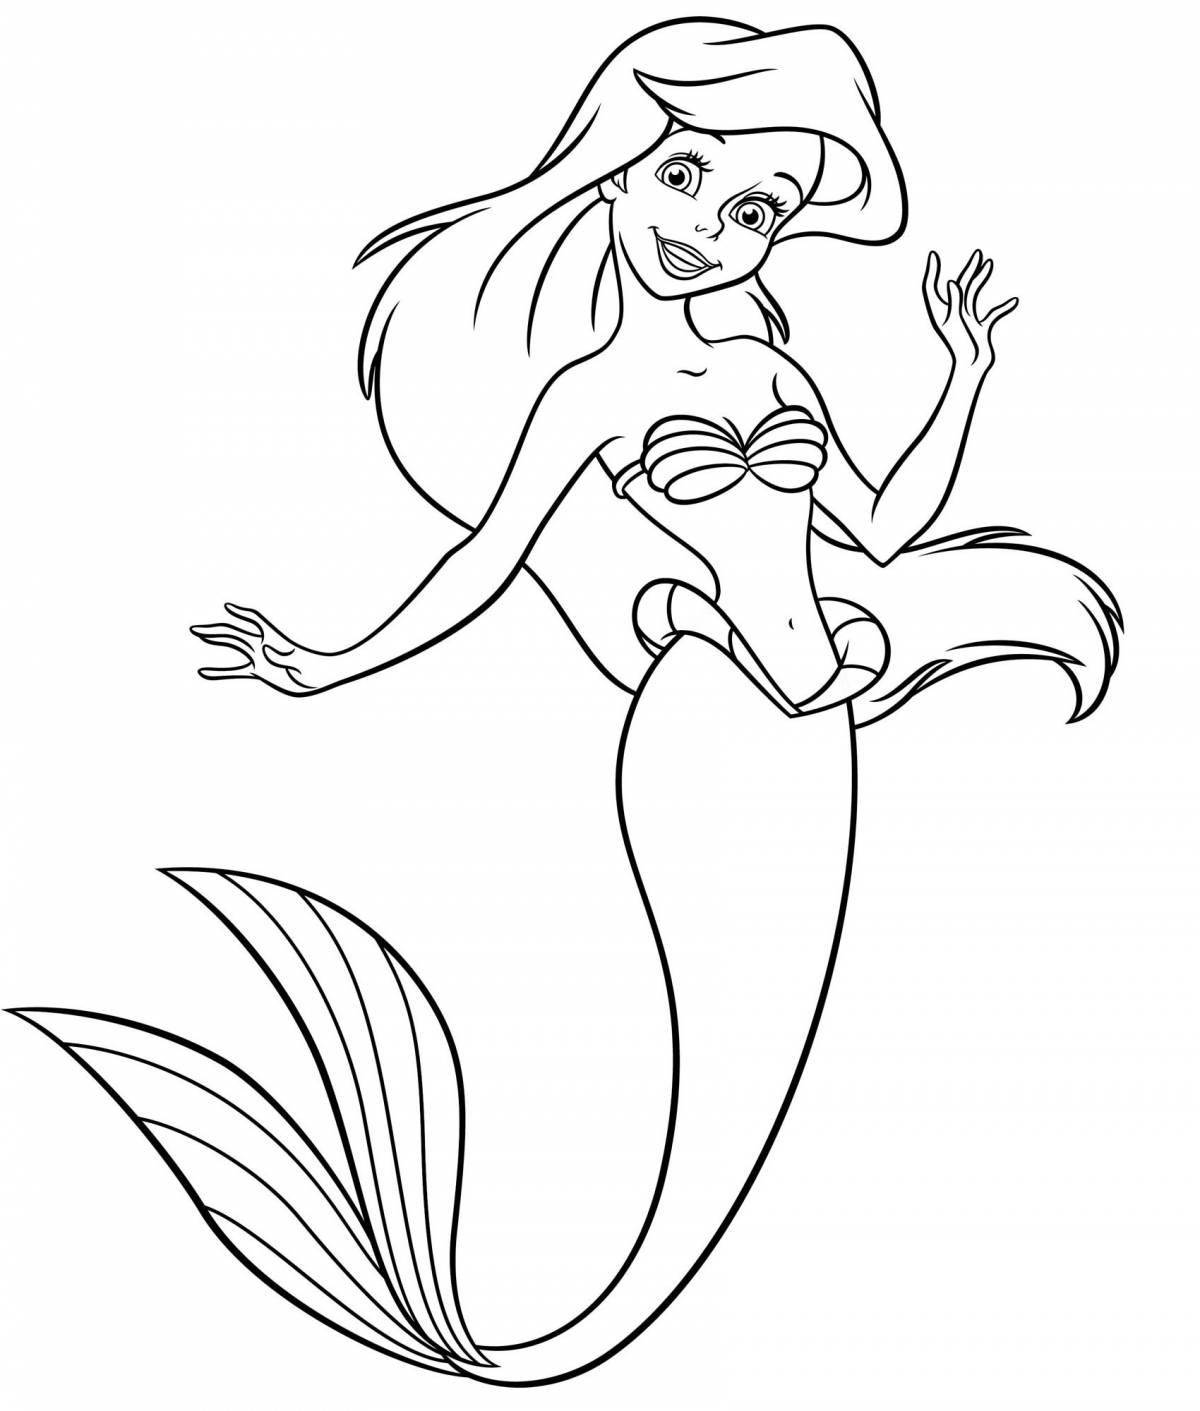 Ariel glowing coloring book for girls